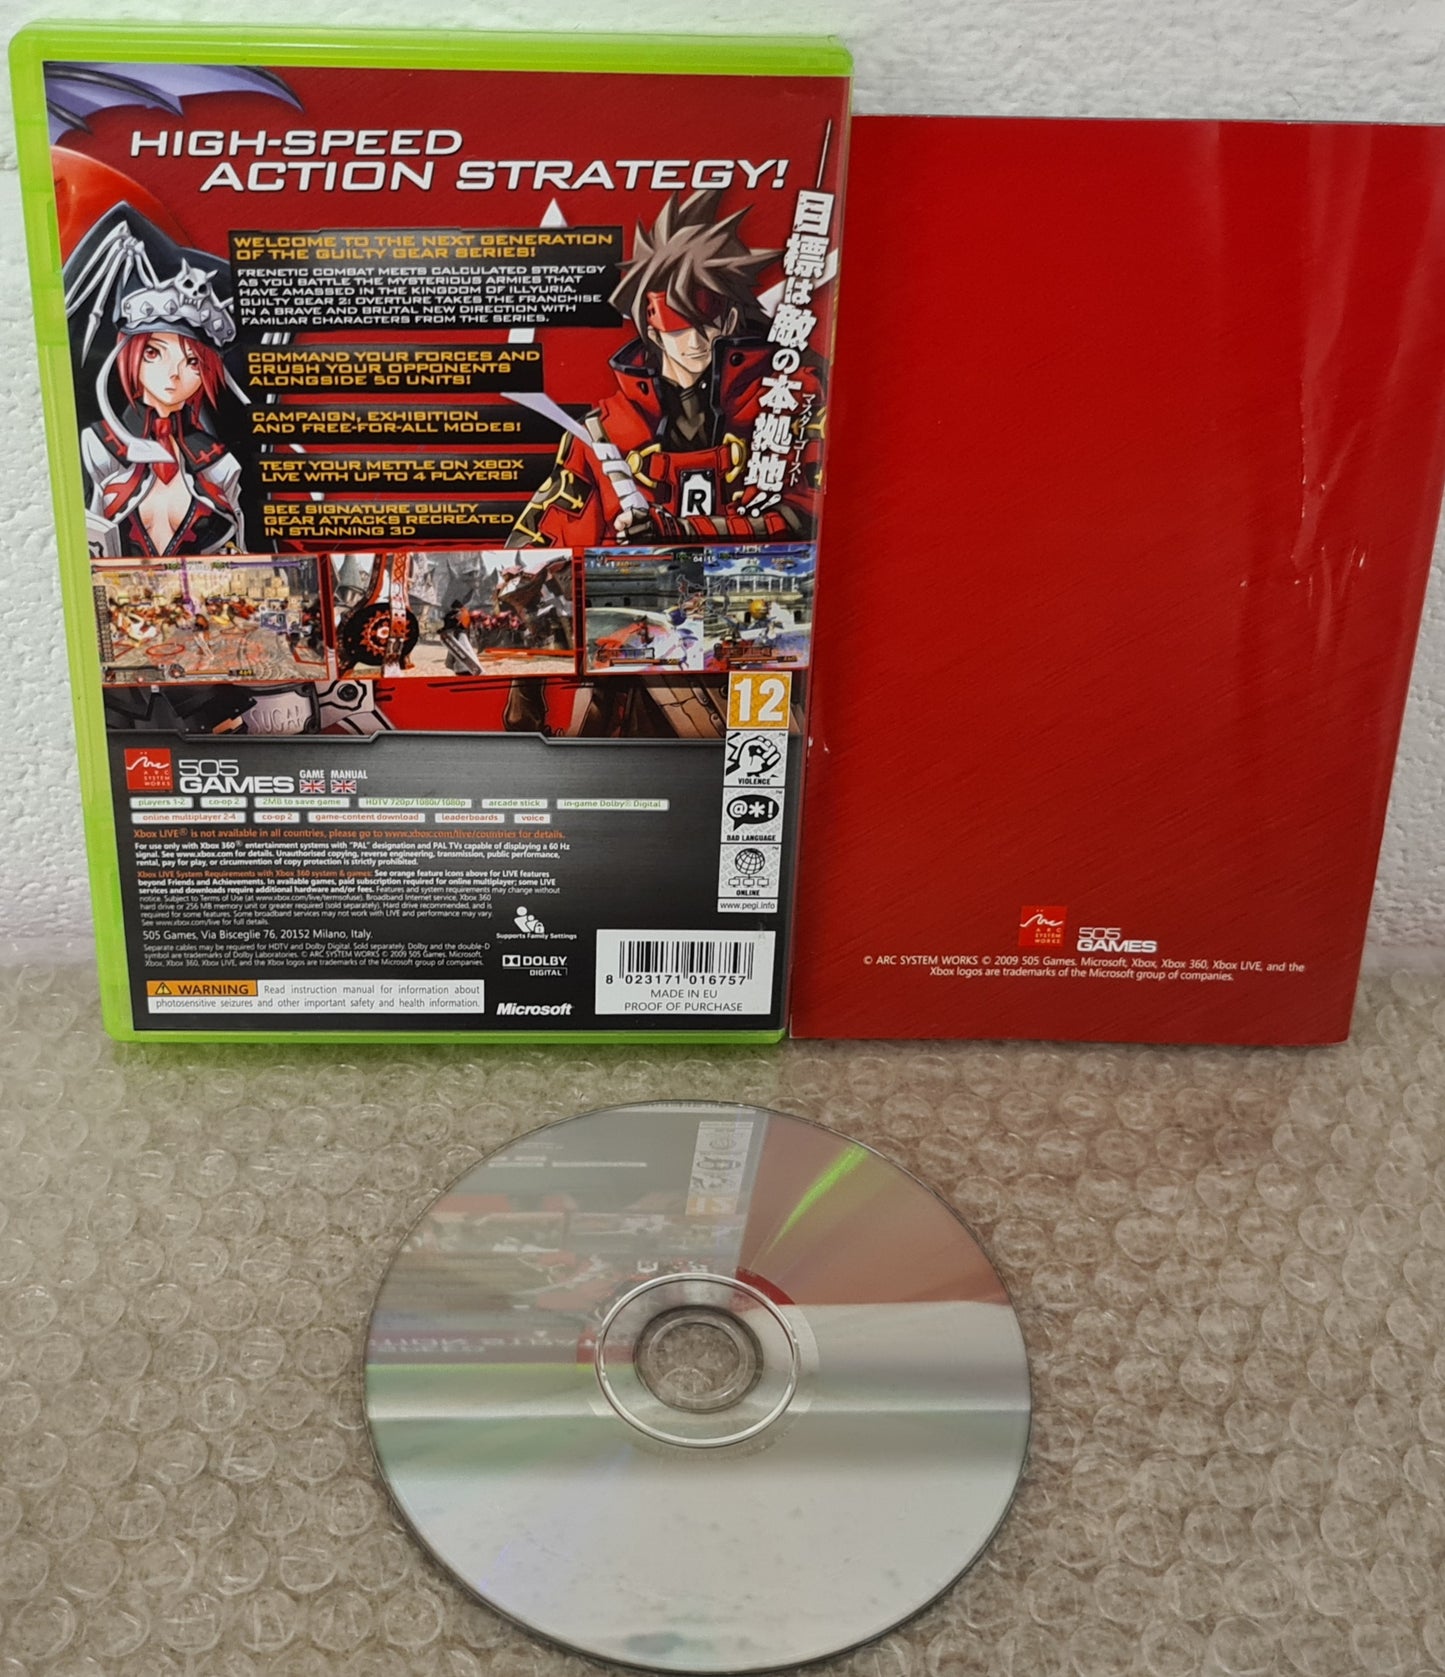 Guilty Gear 2 Overture Microsoft Xbox 360 Game